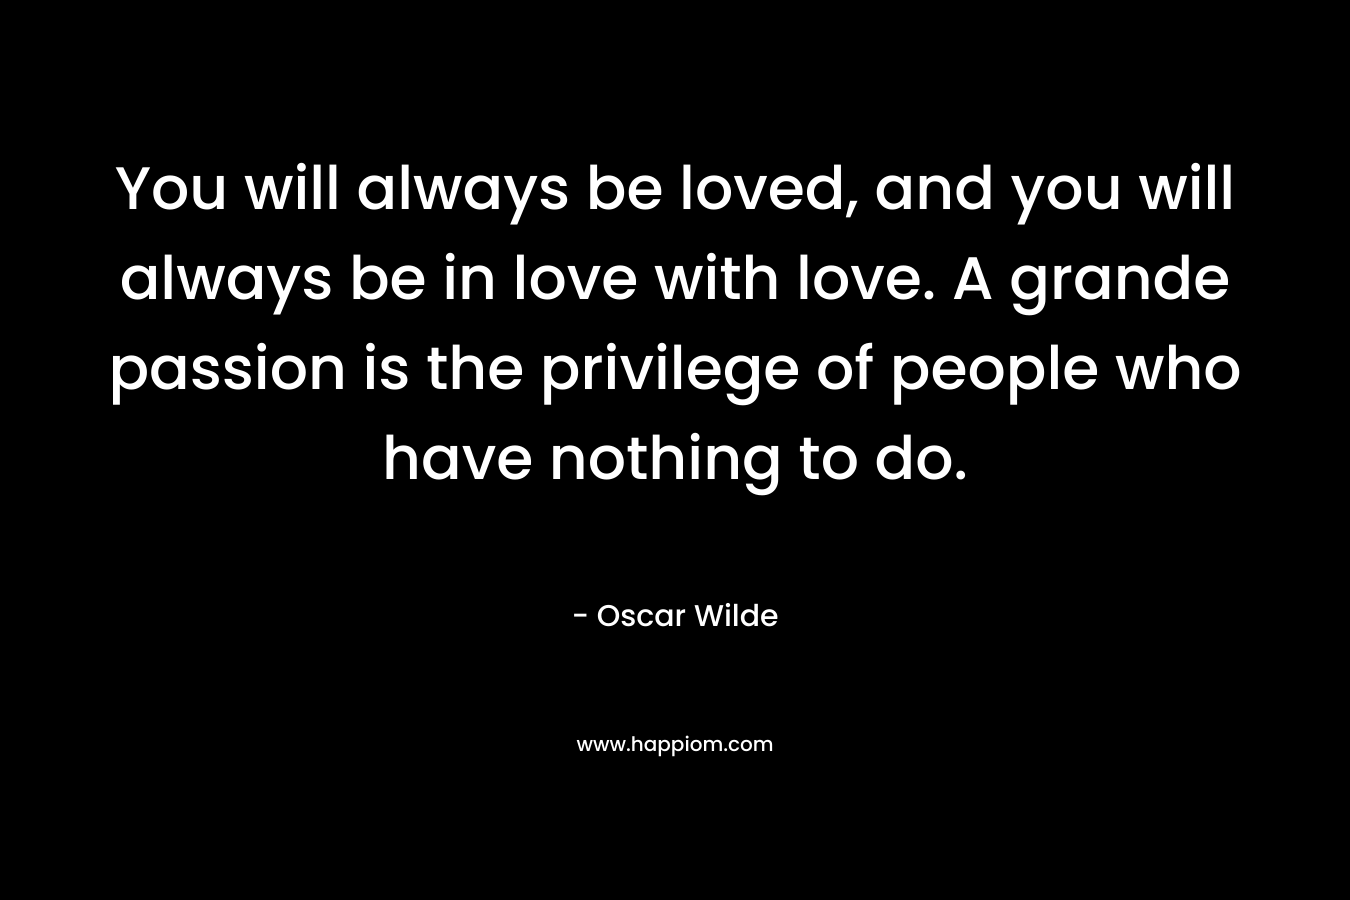 You will always be loved, and you will always be in love with love. A grande passion is the privilege of people who have nothing to do. – Oscar Wilde